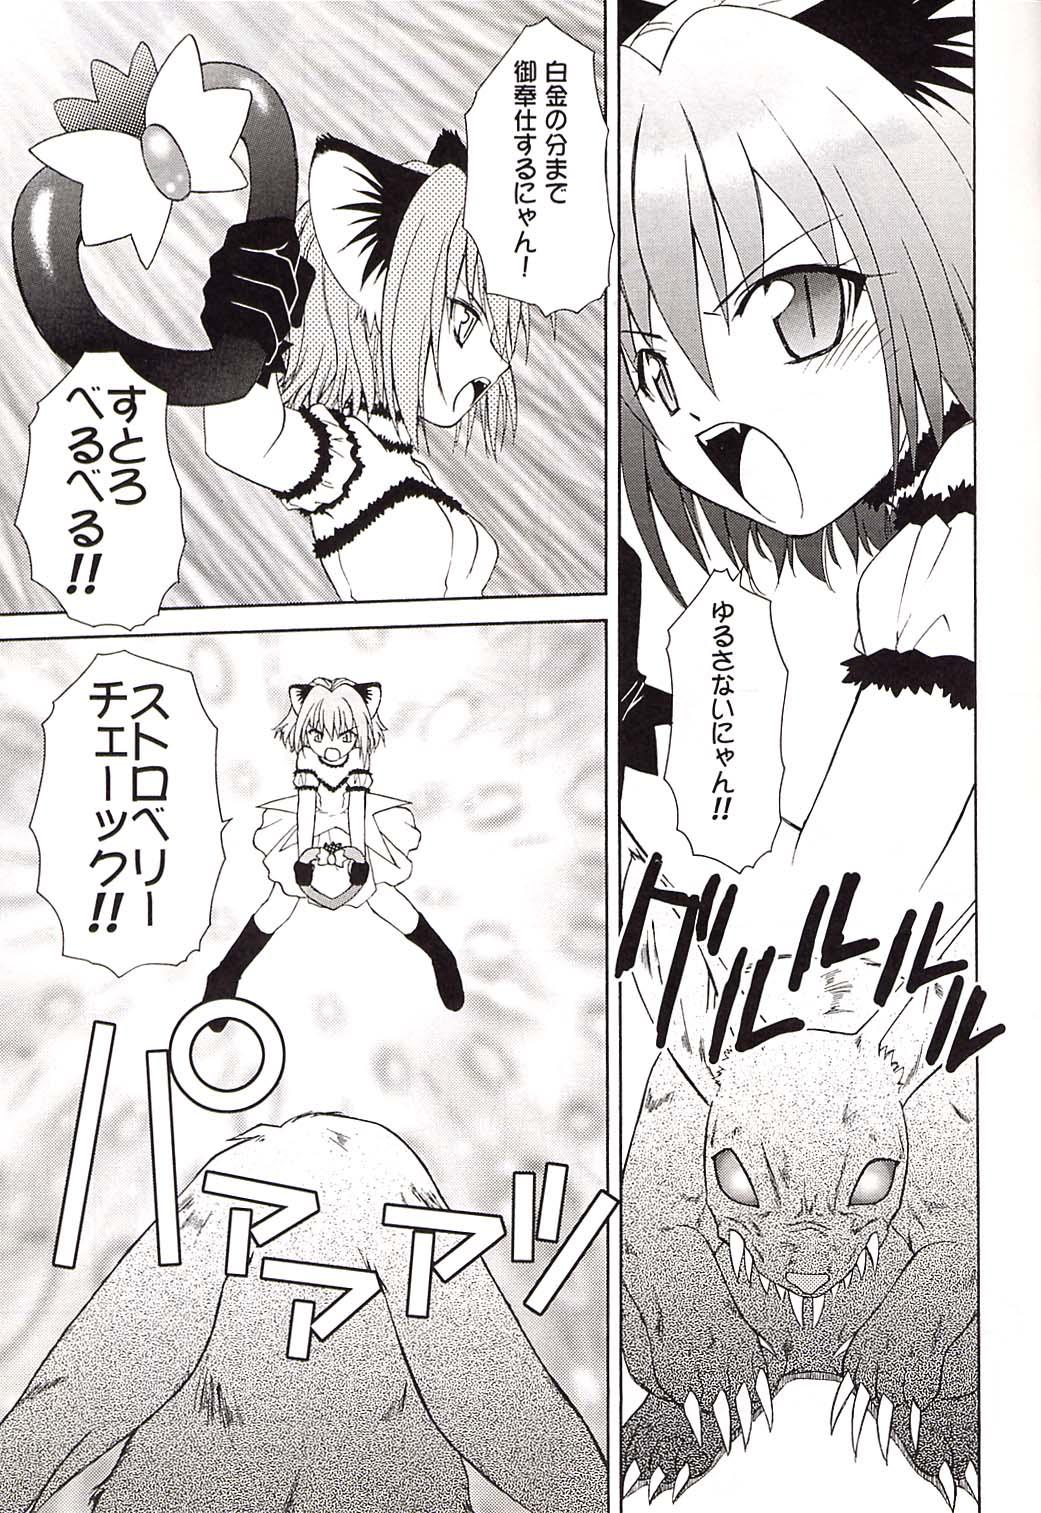 Sis Strawberry sex - Tokyo mew mew Female Domination - Page 10